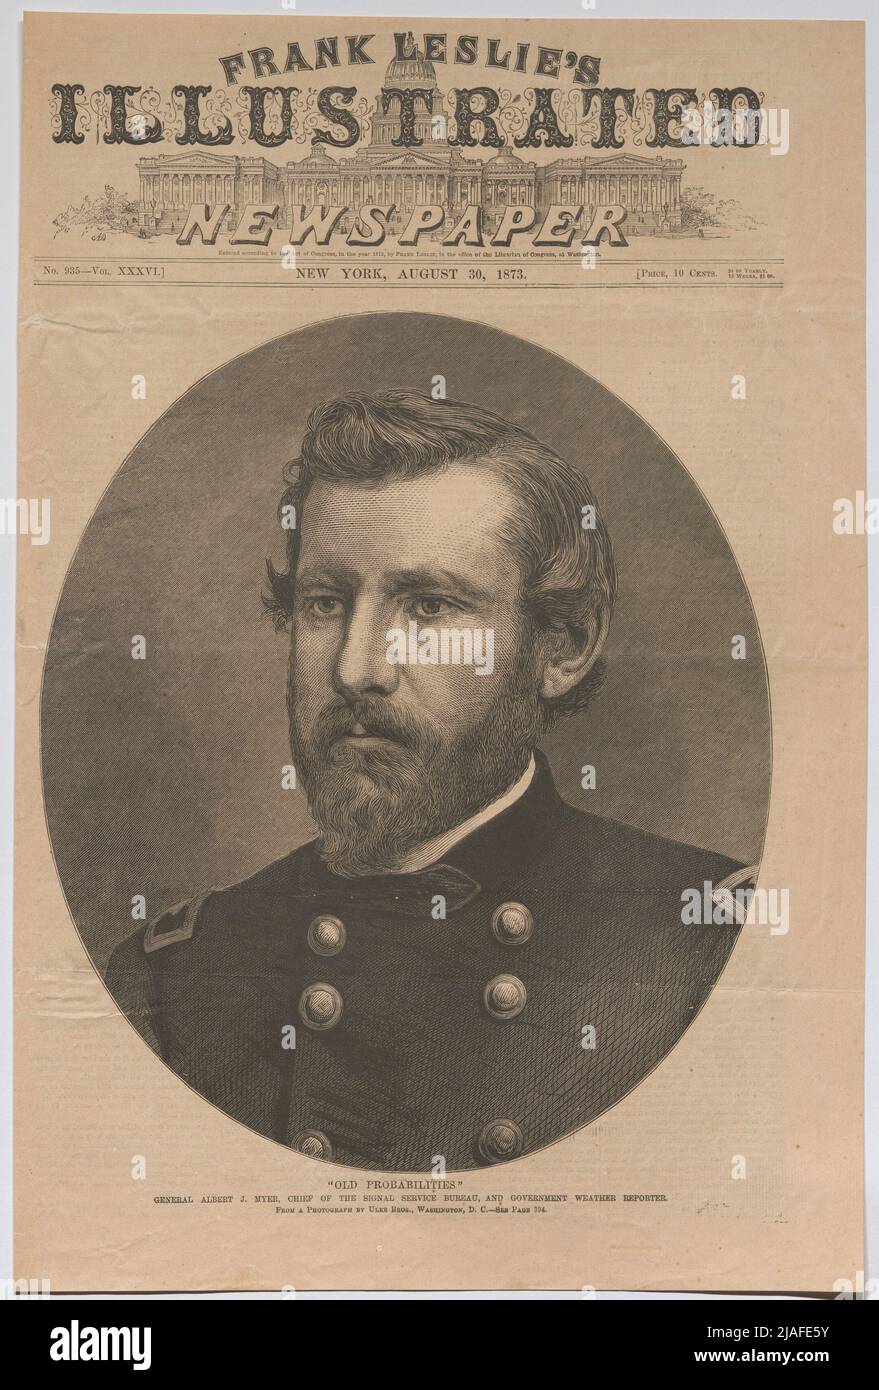 'OLD PROBABILITIES' GENERAL ALBERT J. MYER, CHIEF OF THE SIGNAL SERVICE BUREAU, AND GOVERNMENT WEATHER REPORTER.'. General Albert J. Myer, Chef des Fernmeldedienstes und Meteorologe der Regierung ('Frank Leslie´s Ilustrated Newspaper.'). Unknown Stock Photo